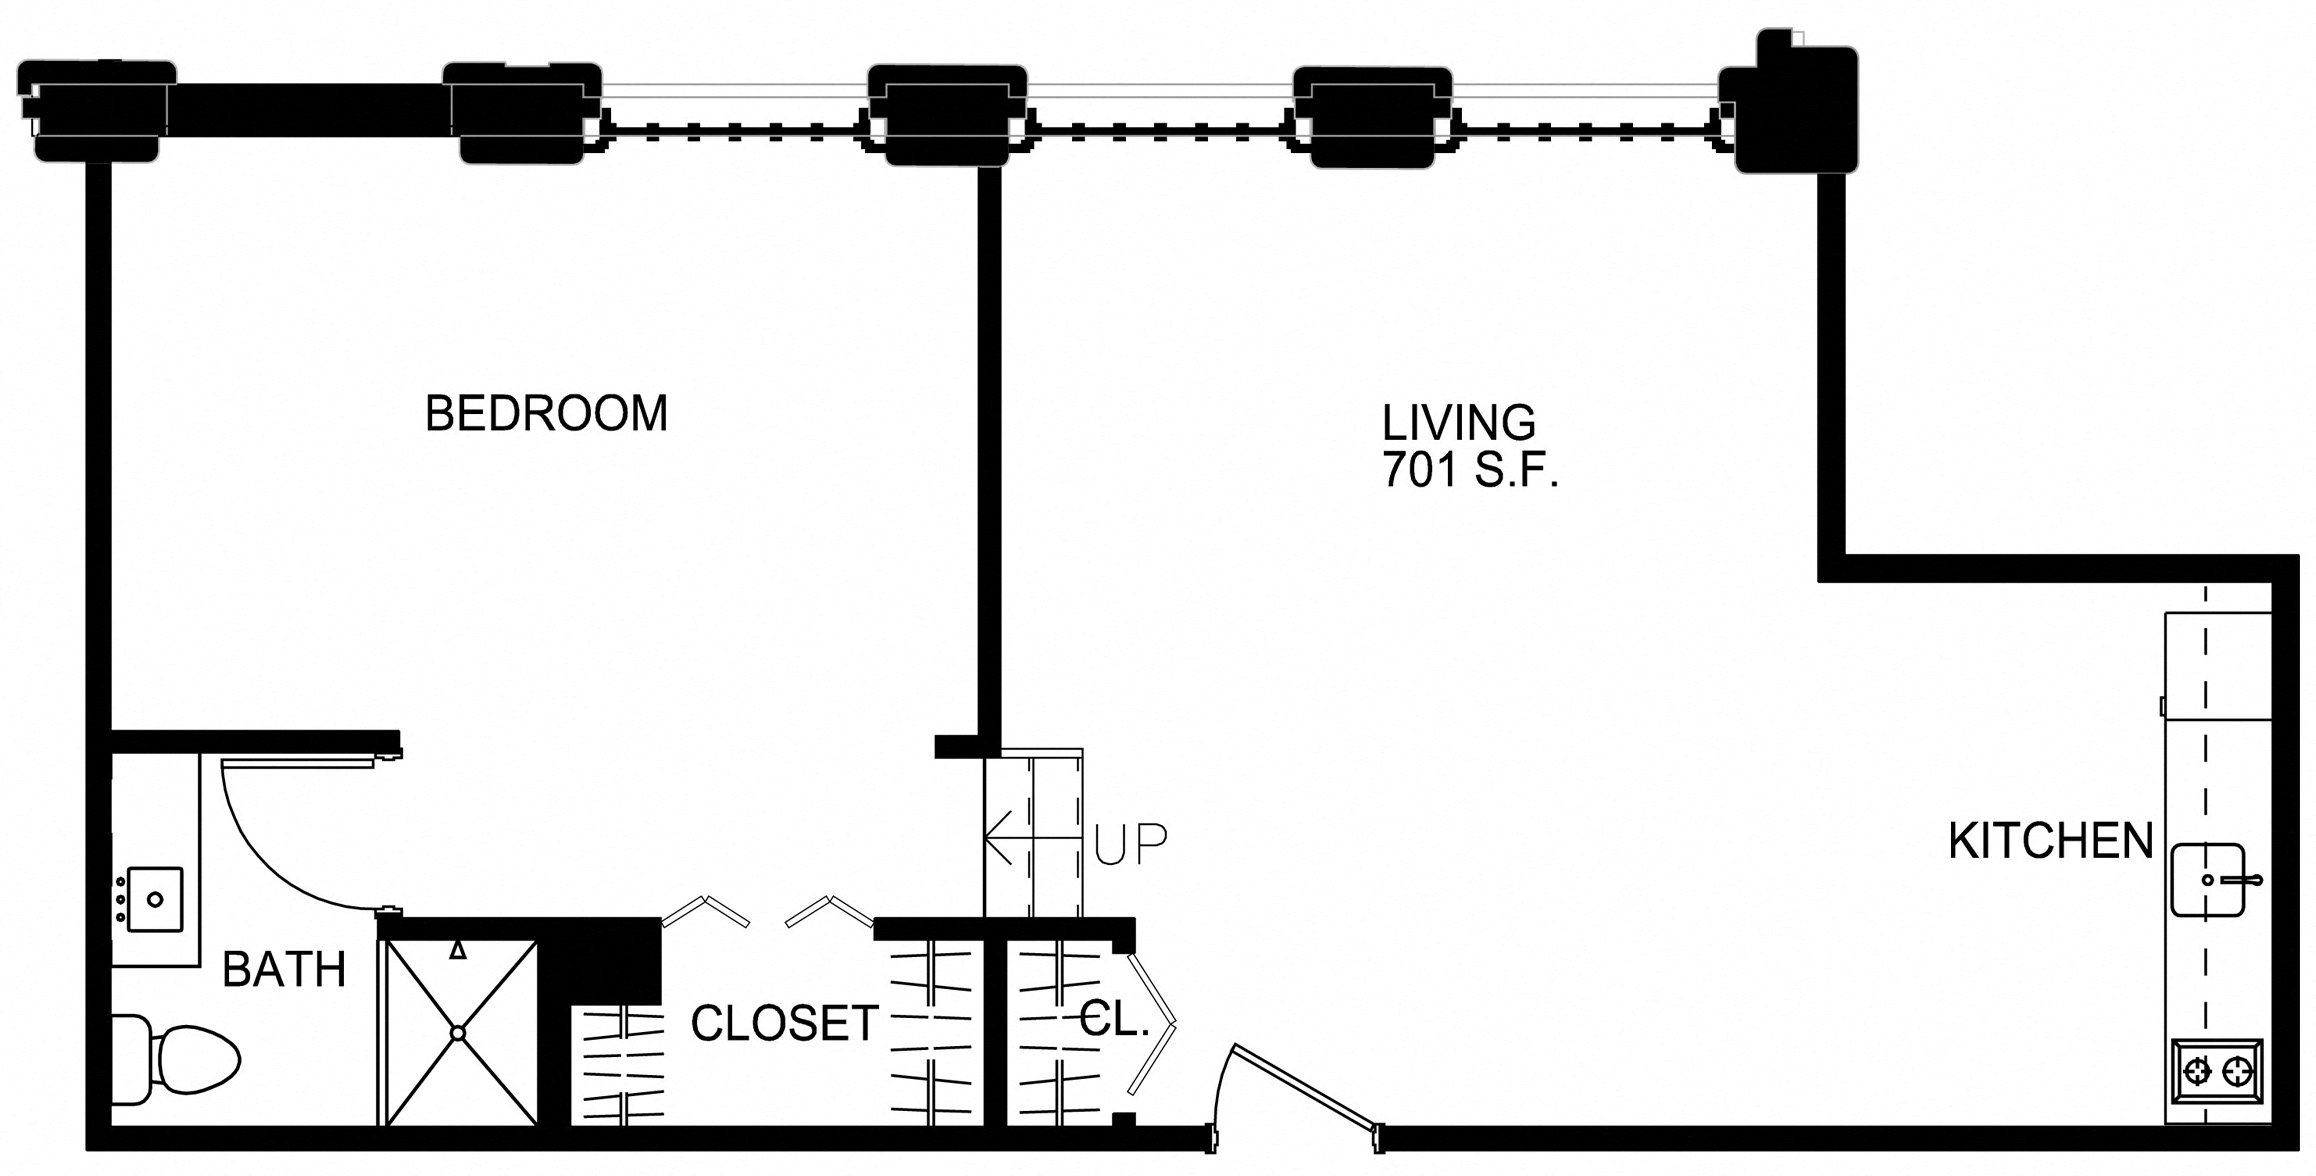 Floorplan for Apartment #S2614, 0 bedroom unit at Halstead Providence